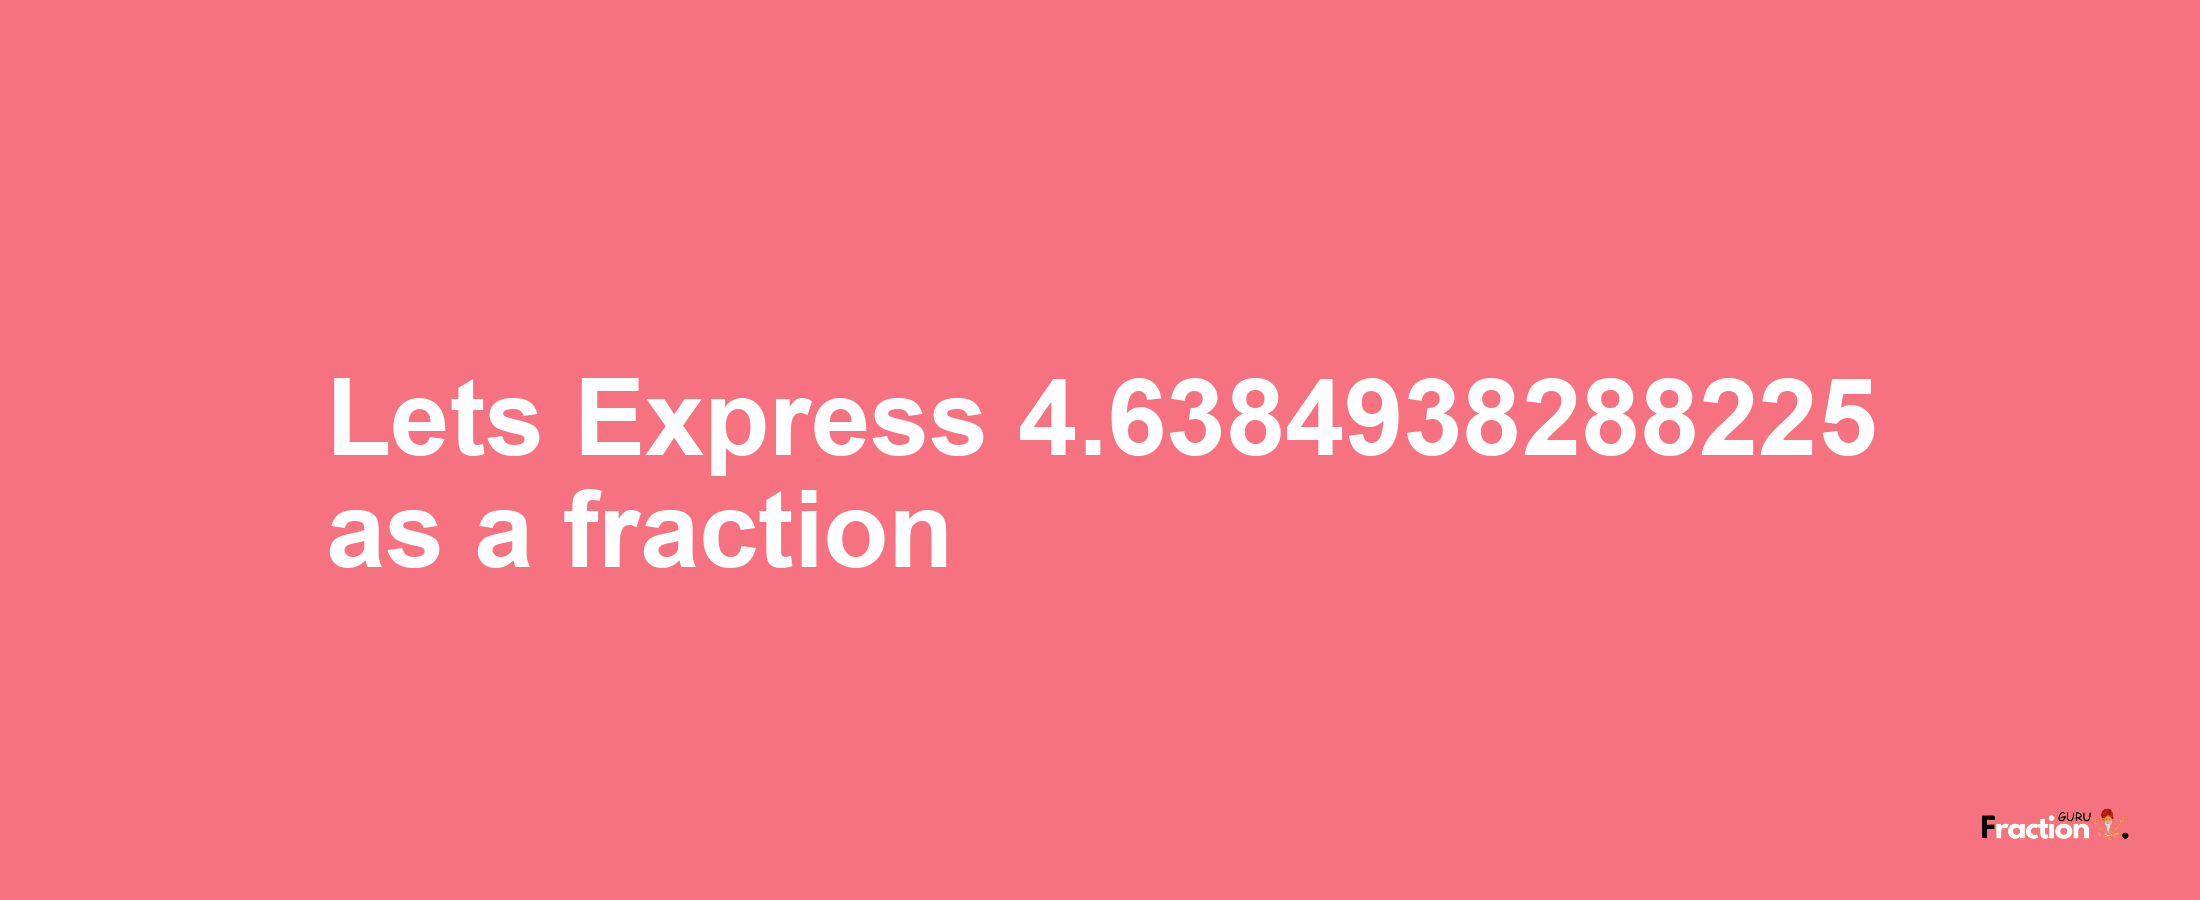 Lets Express 4.6384938288225 as afraction